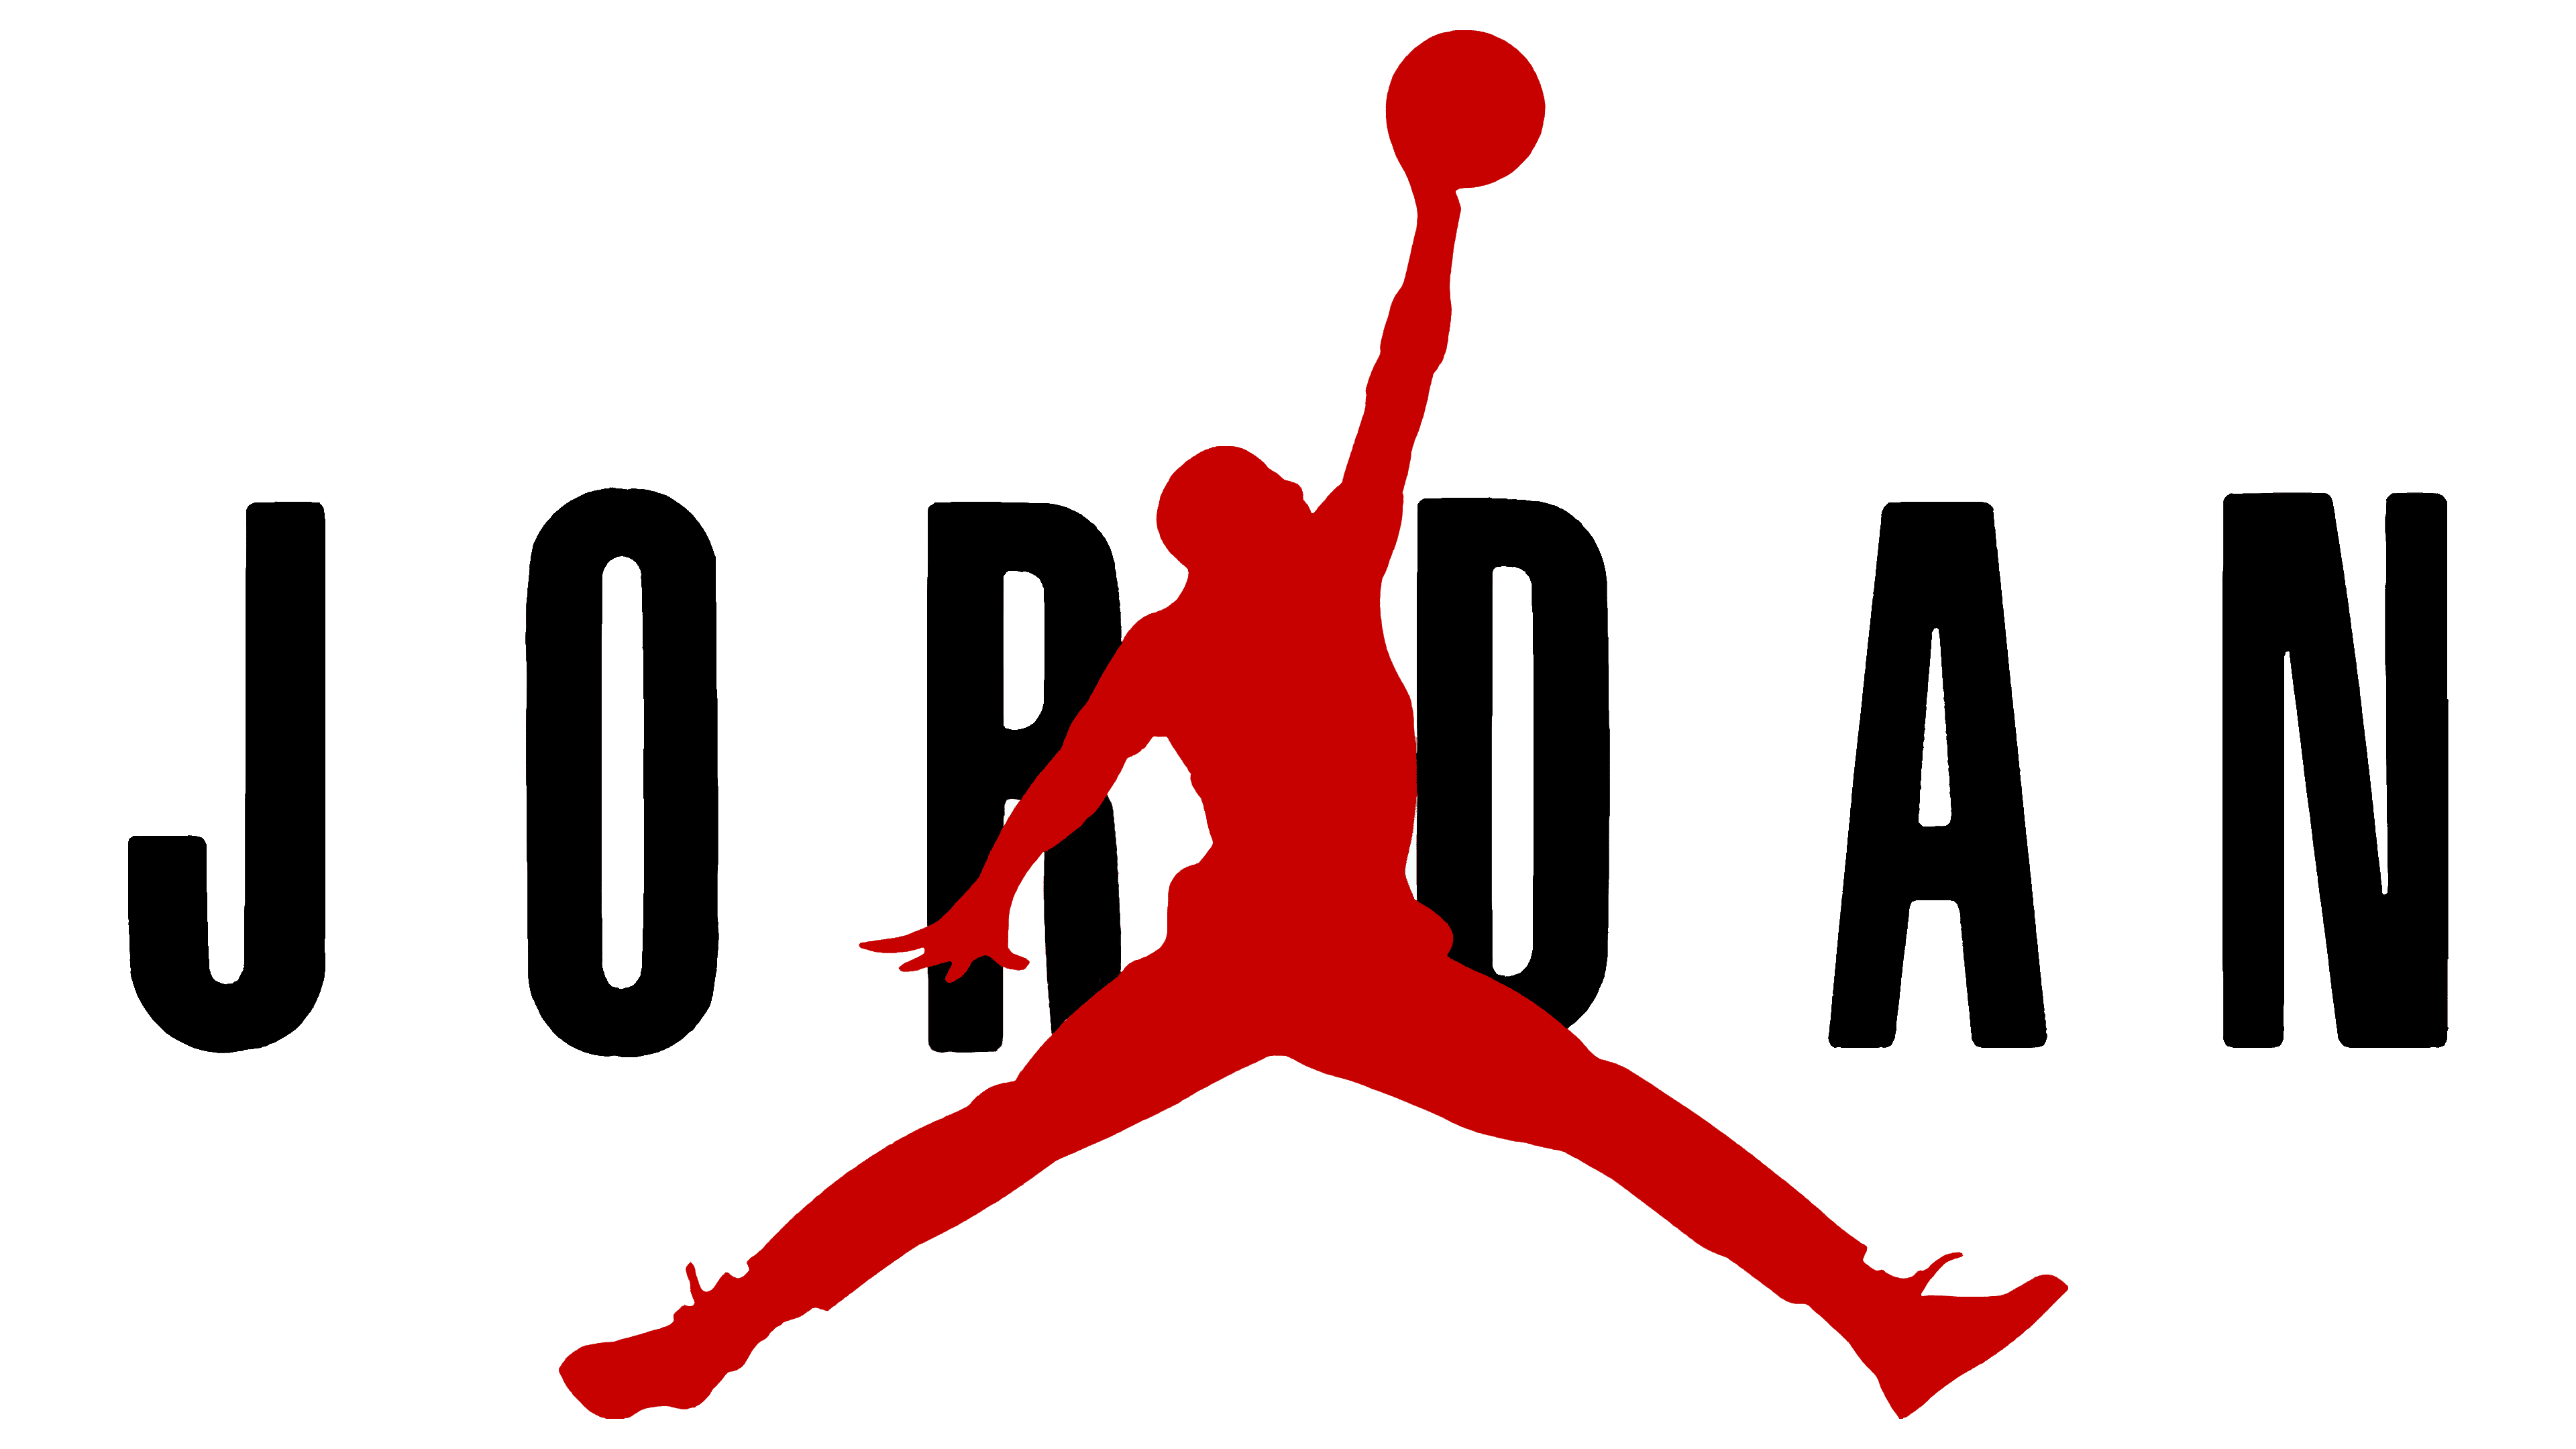 Air Jordans 1, Jordans 4, Jordans 3, Jordans 5 and Jordans 11 Sale From UK Outlet Store